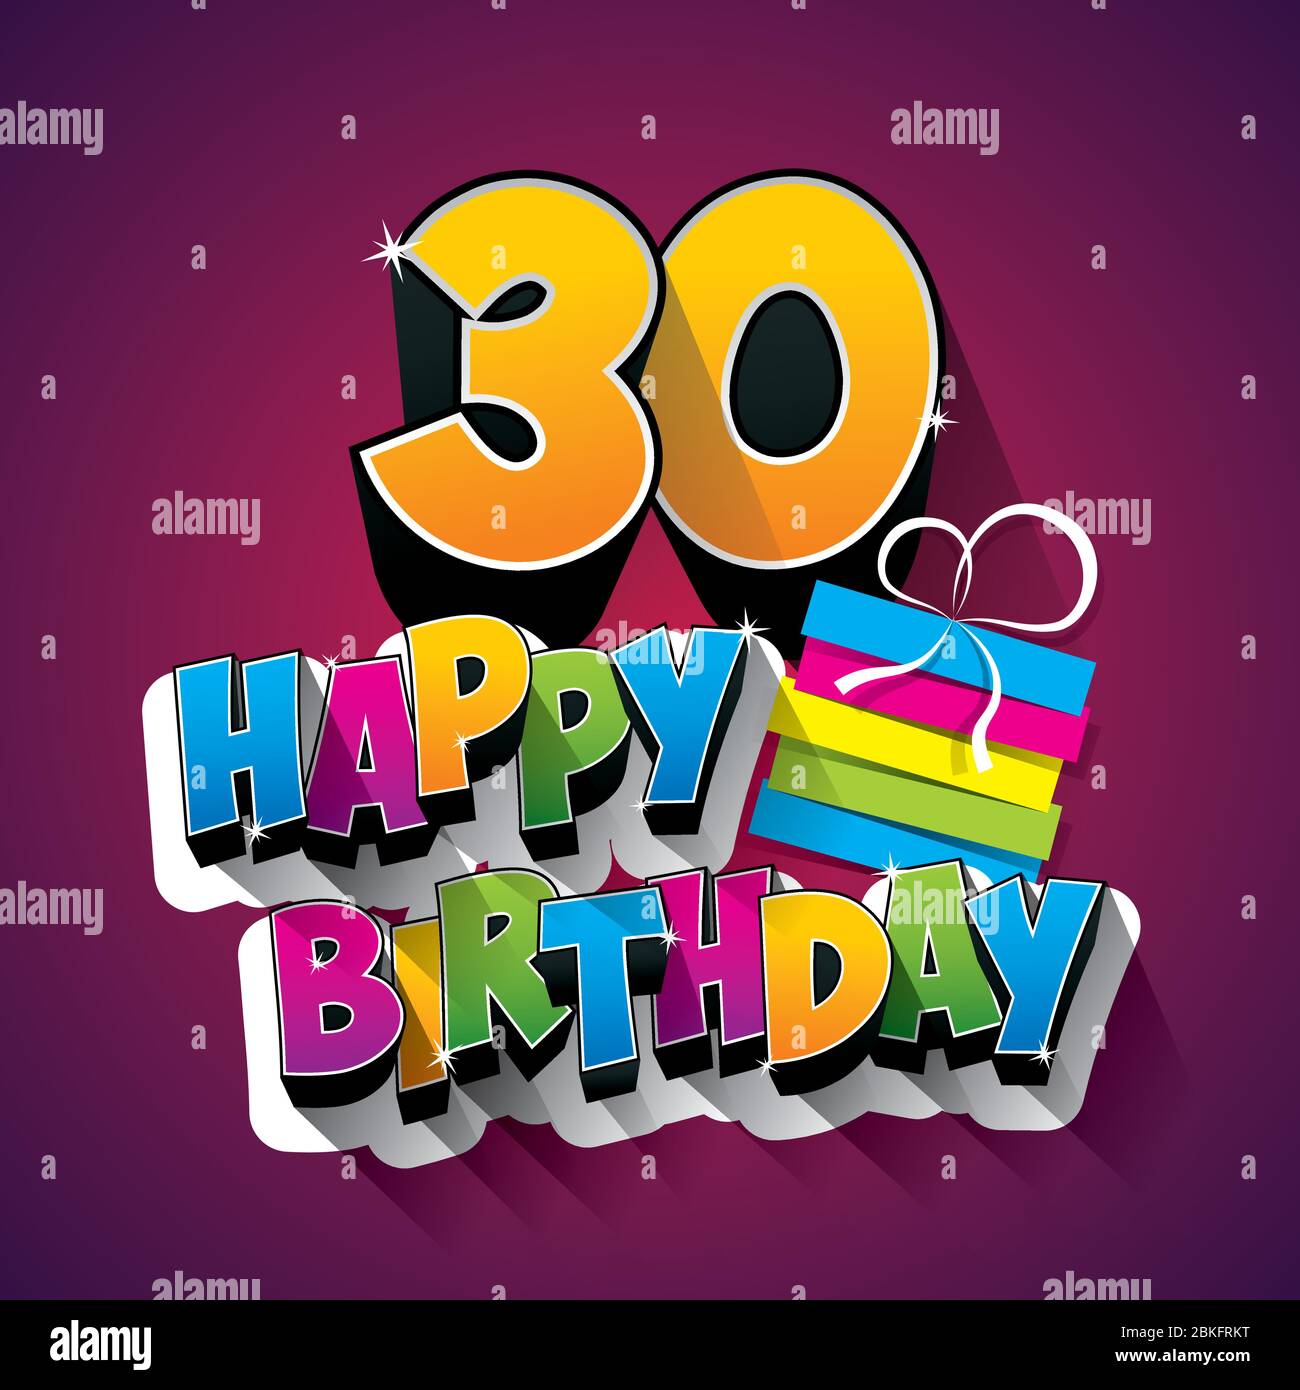 Happy Birthday Greeting Card On Background vector Illustration Stock ...